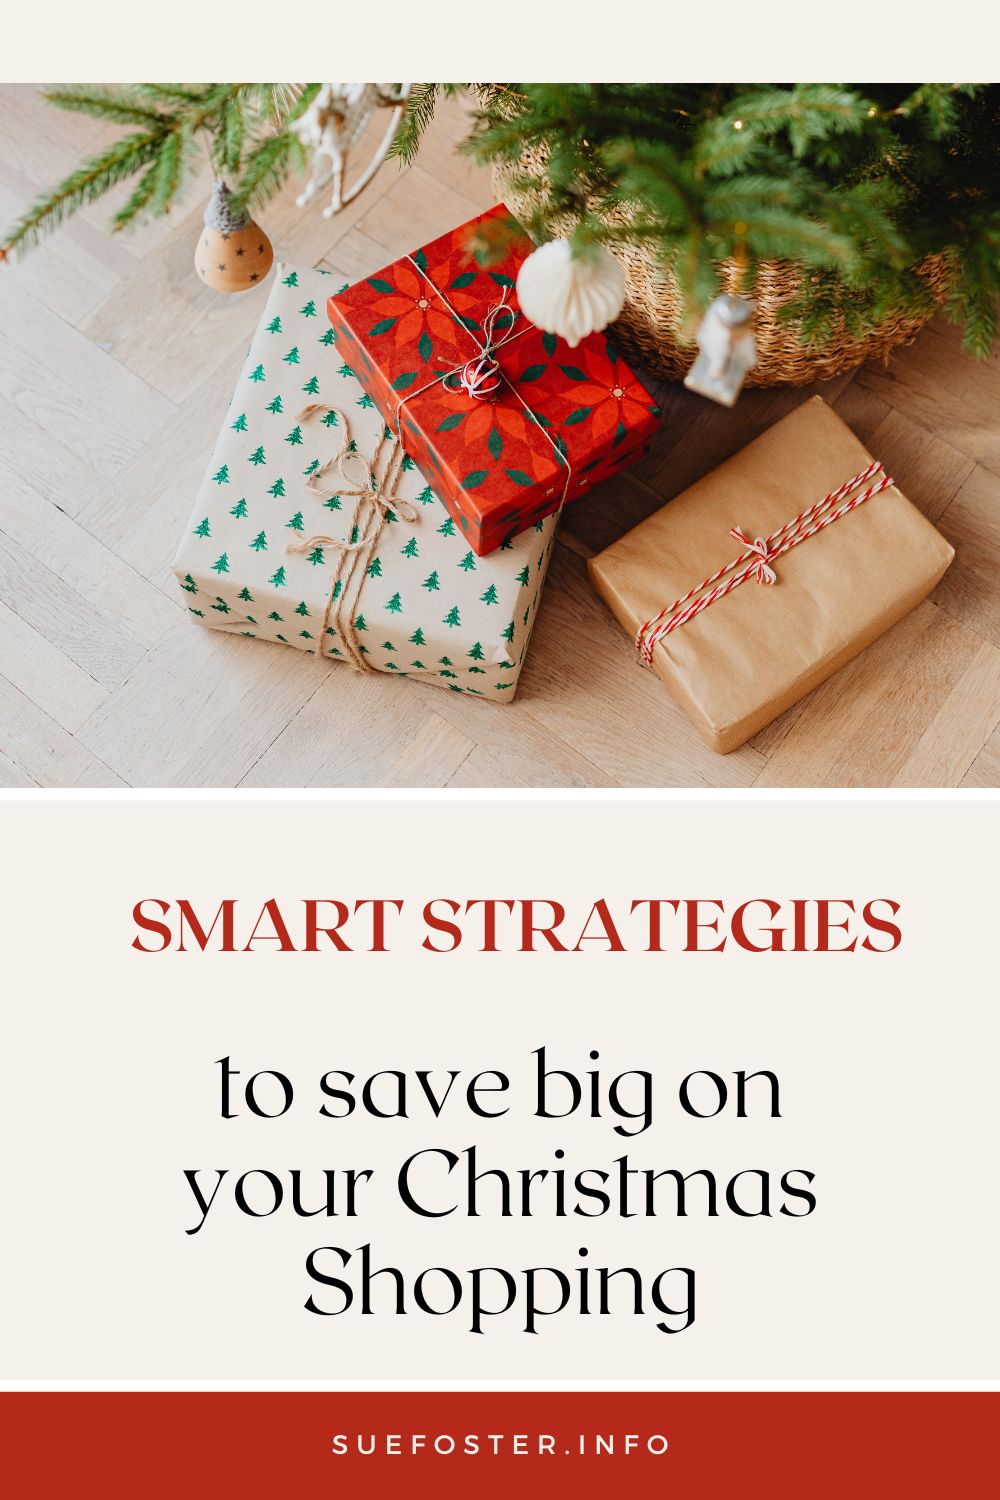 Conquer the holiday rush without breaking the bank! Budget tips & savvy strategies for joyful, budget-friendly festive shopping without overspending.